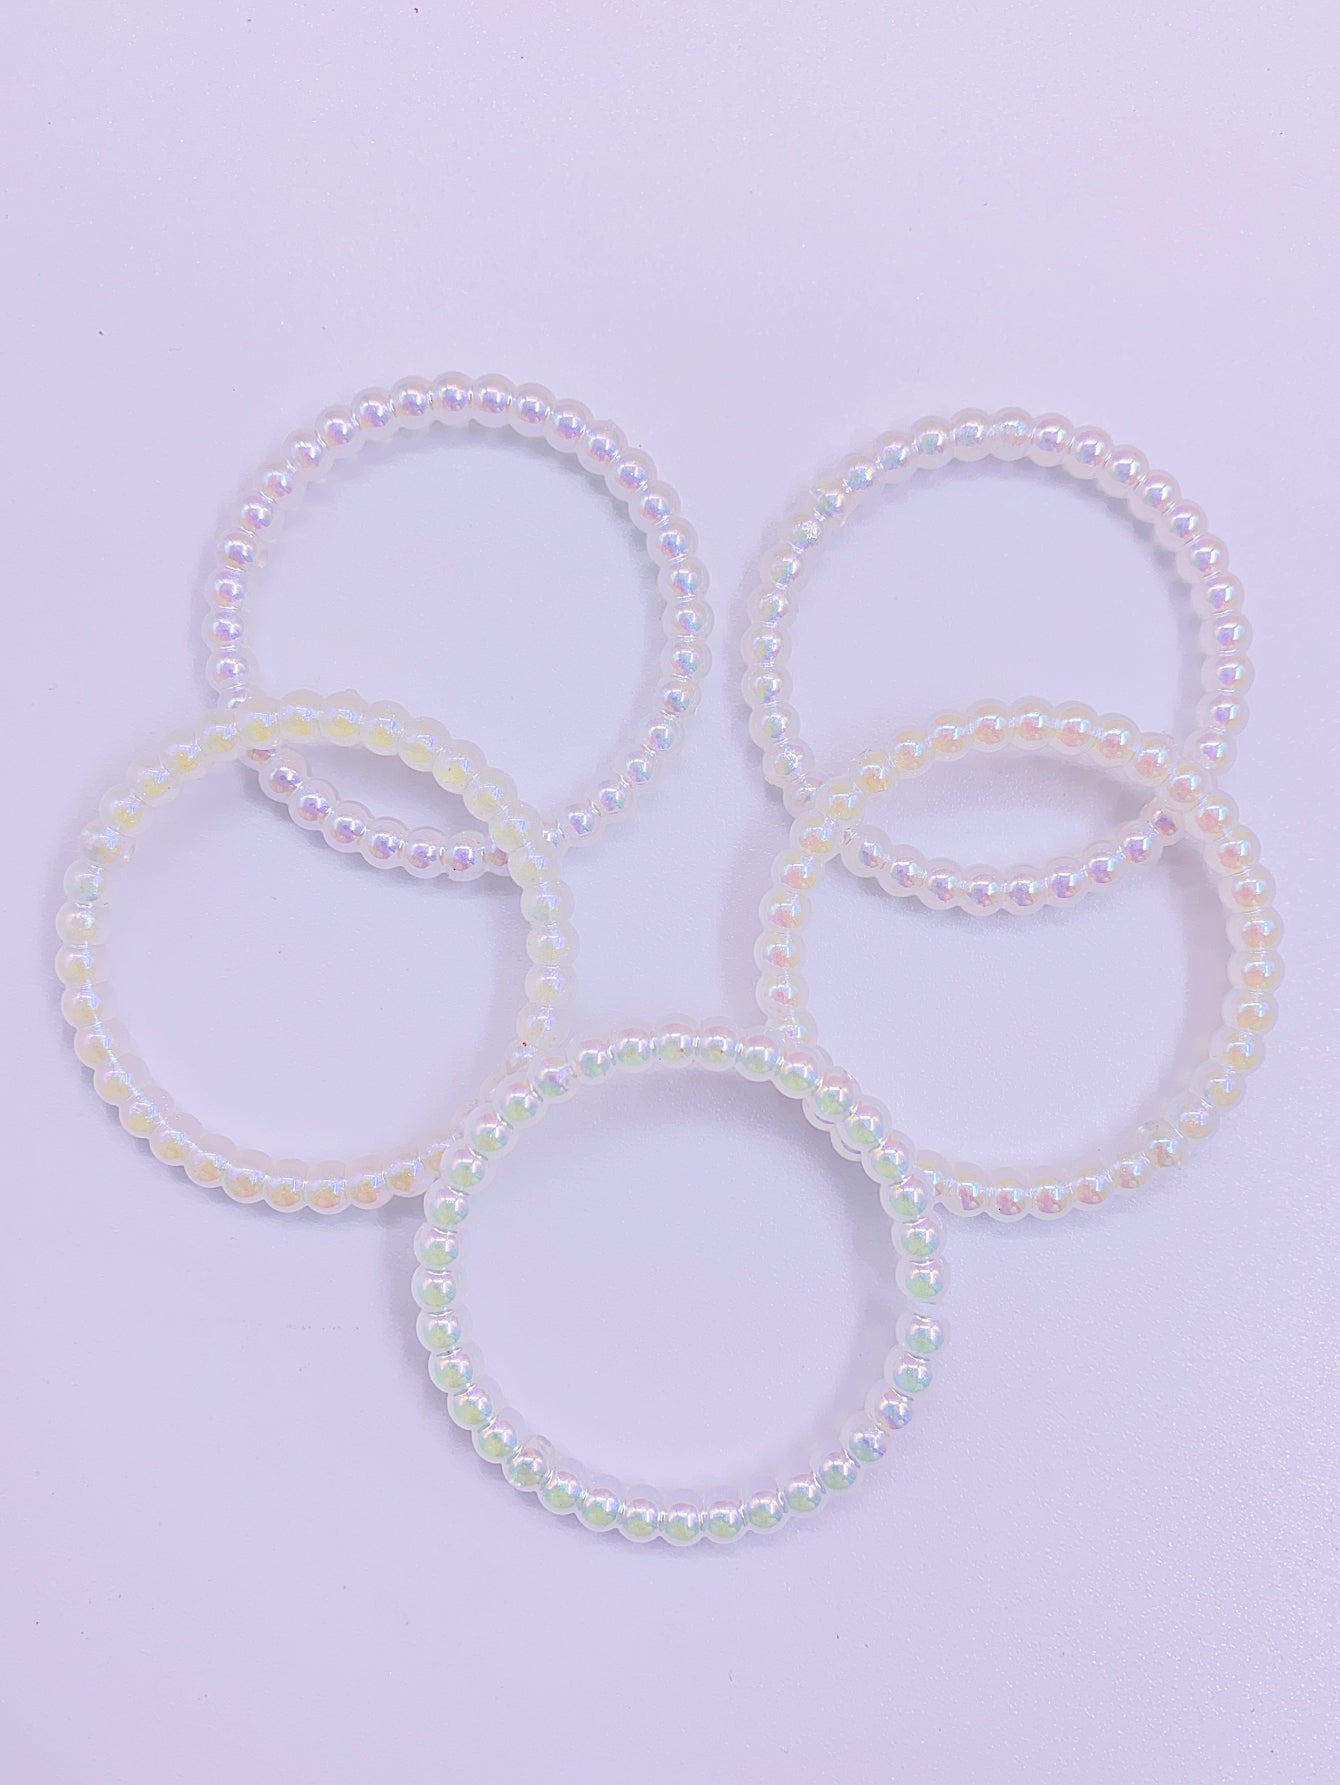 Mermaid star color series new bead large circle straight hole car hanging jewelry hanging accessories beaded materials